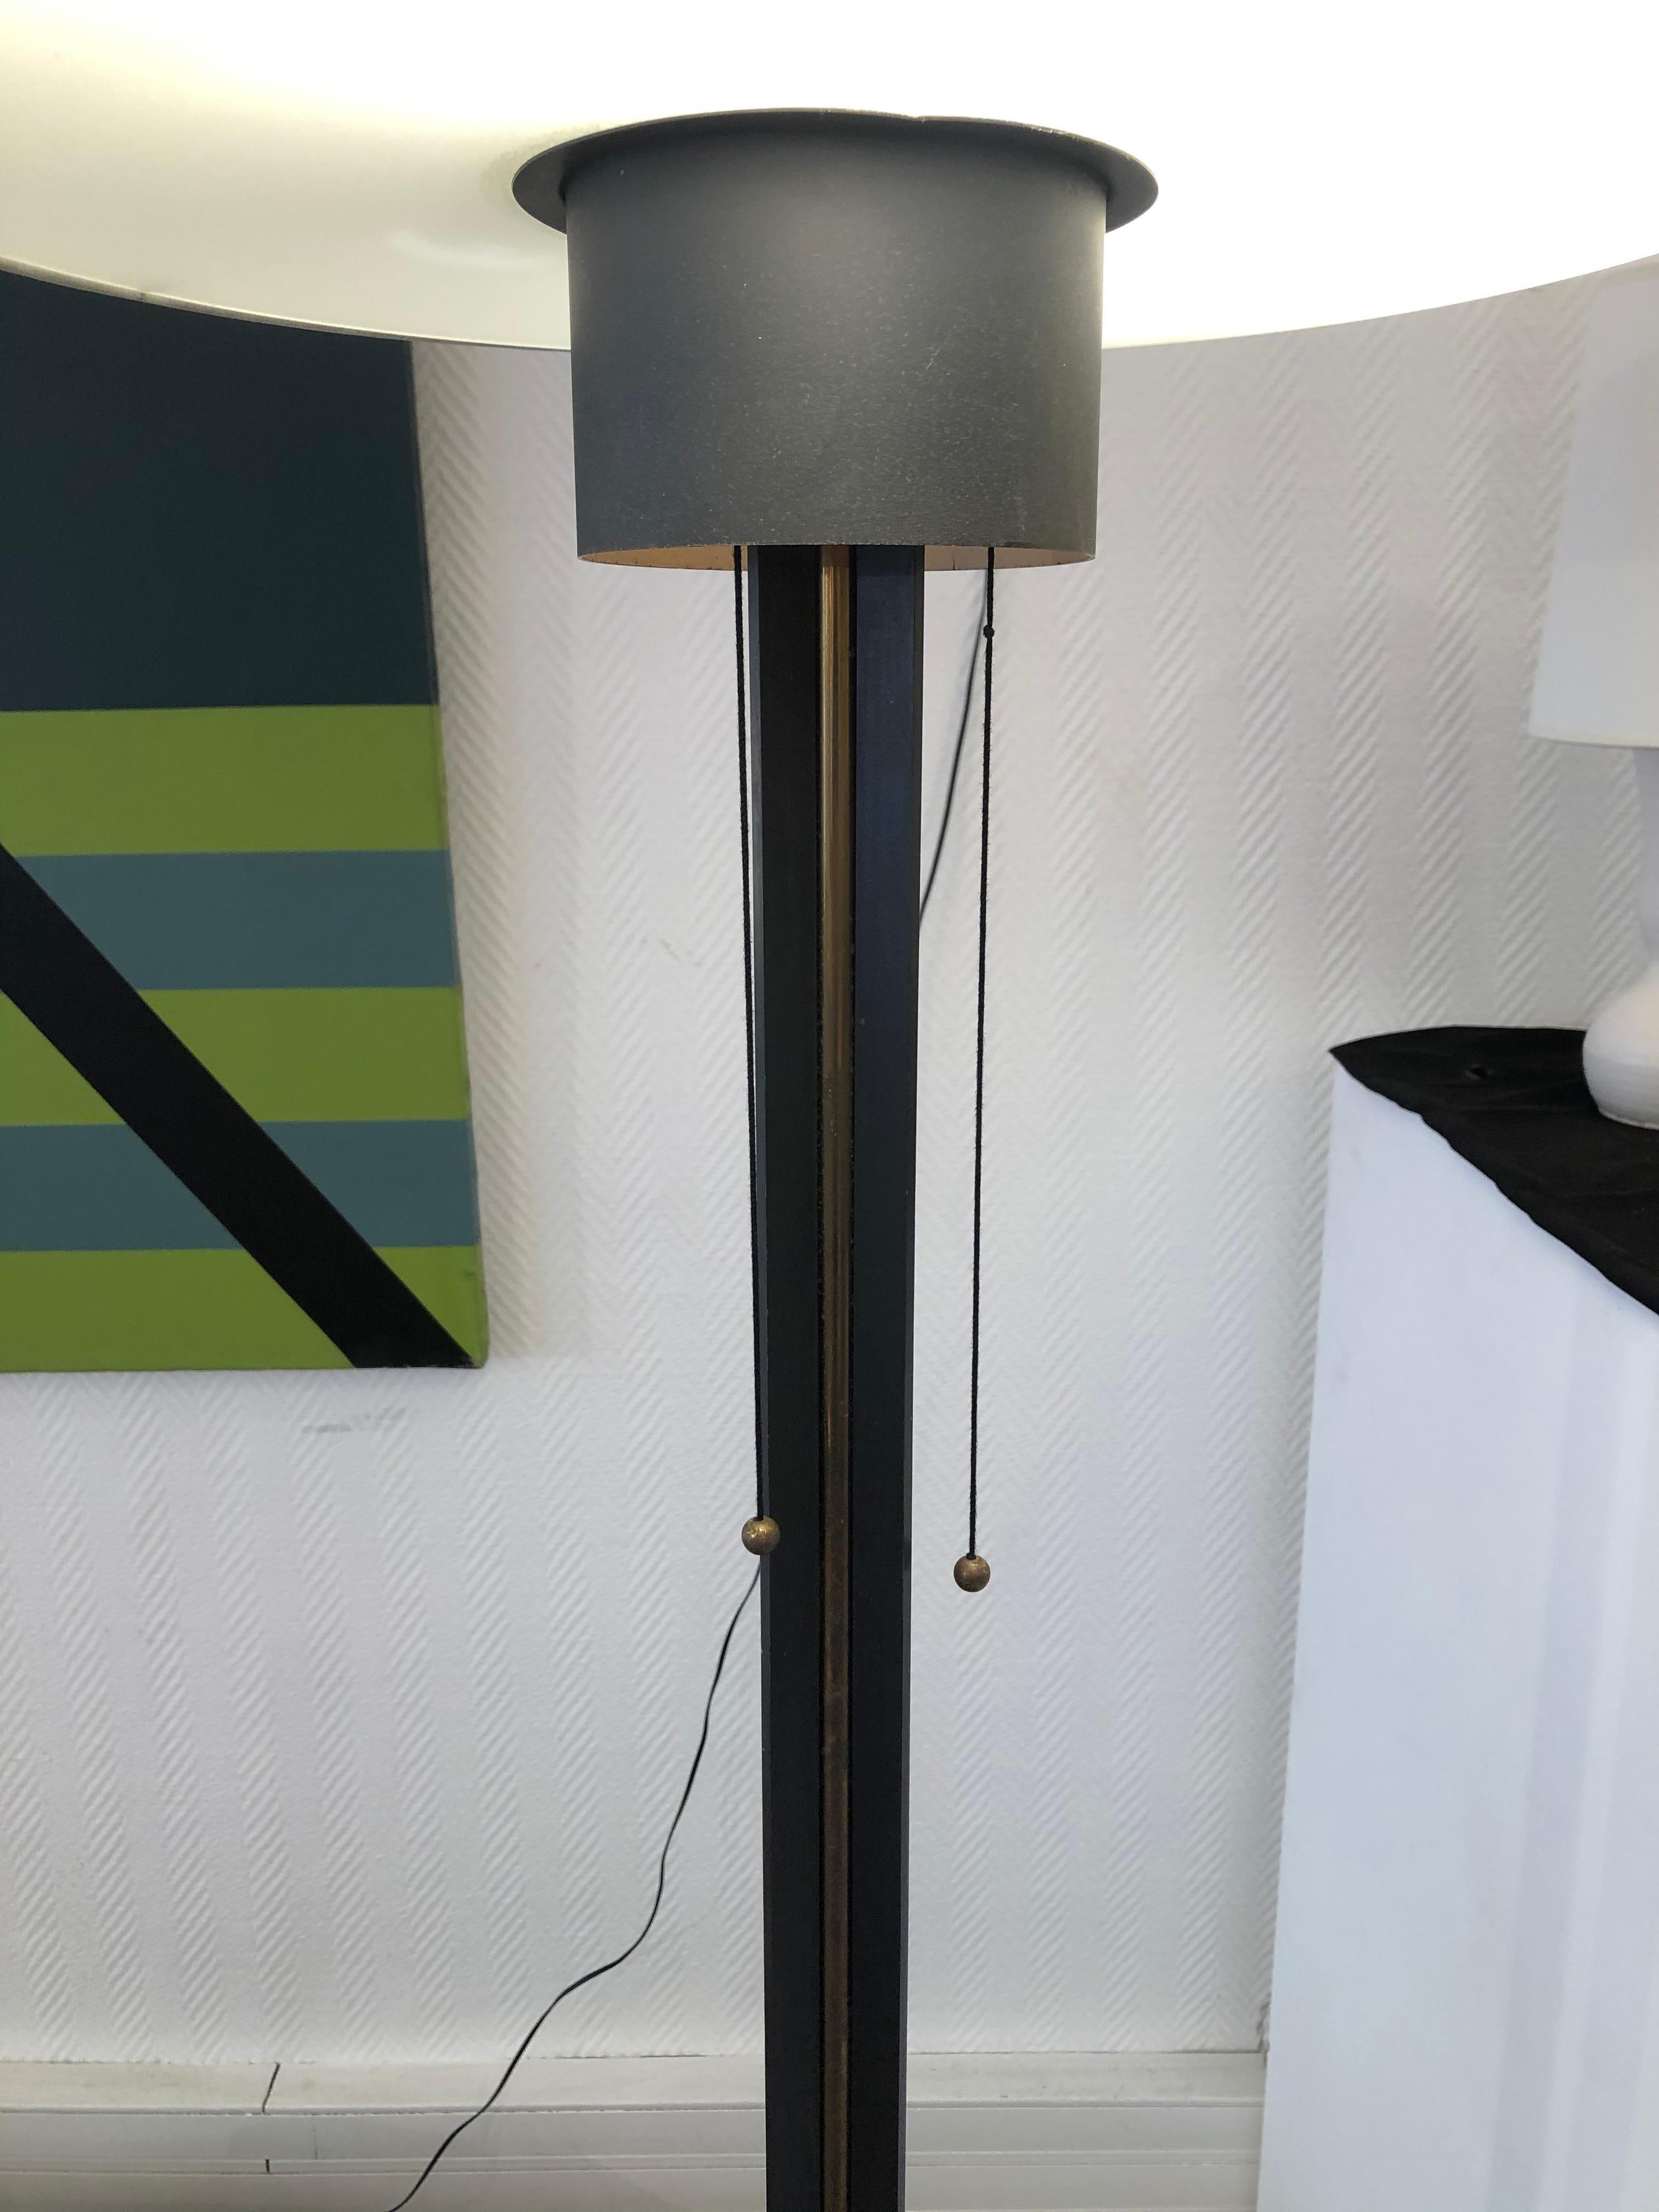 Floor lamp by Maison Arlus
Brass and metal
from 1950.